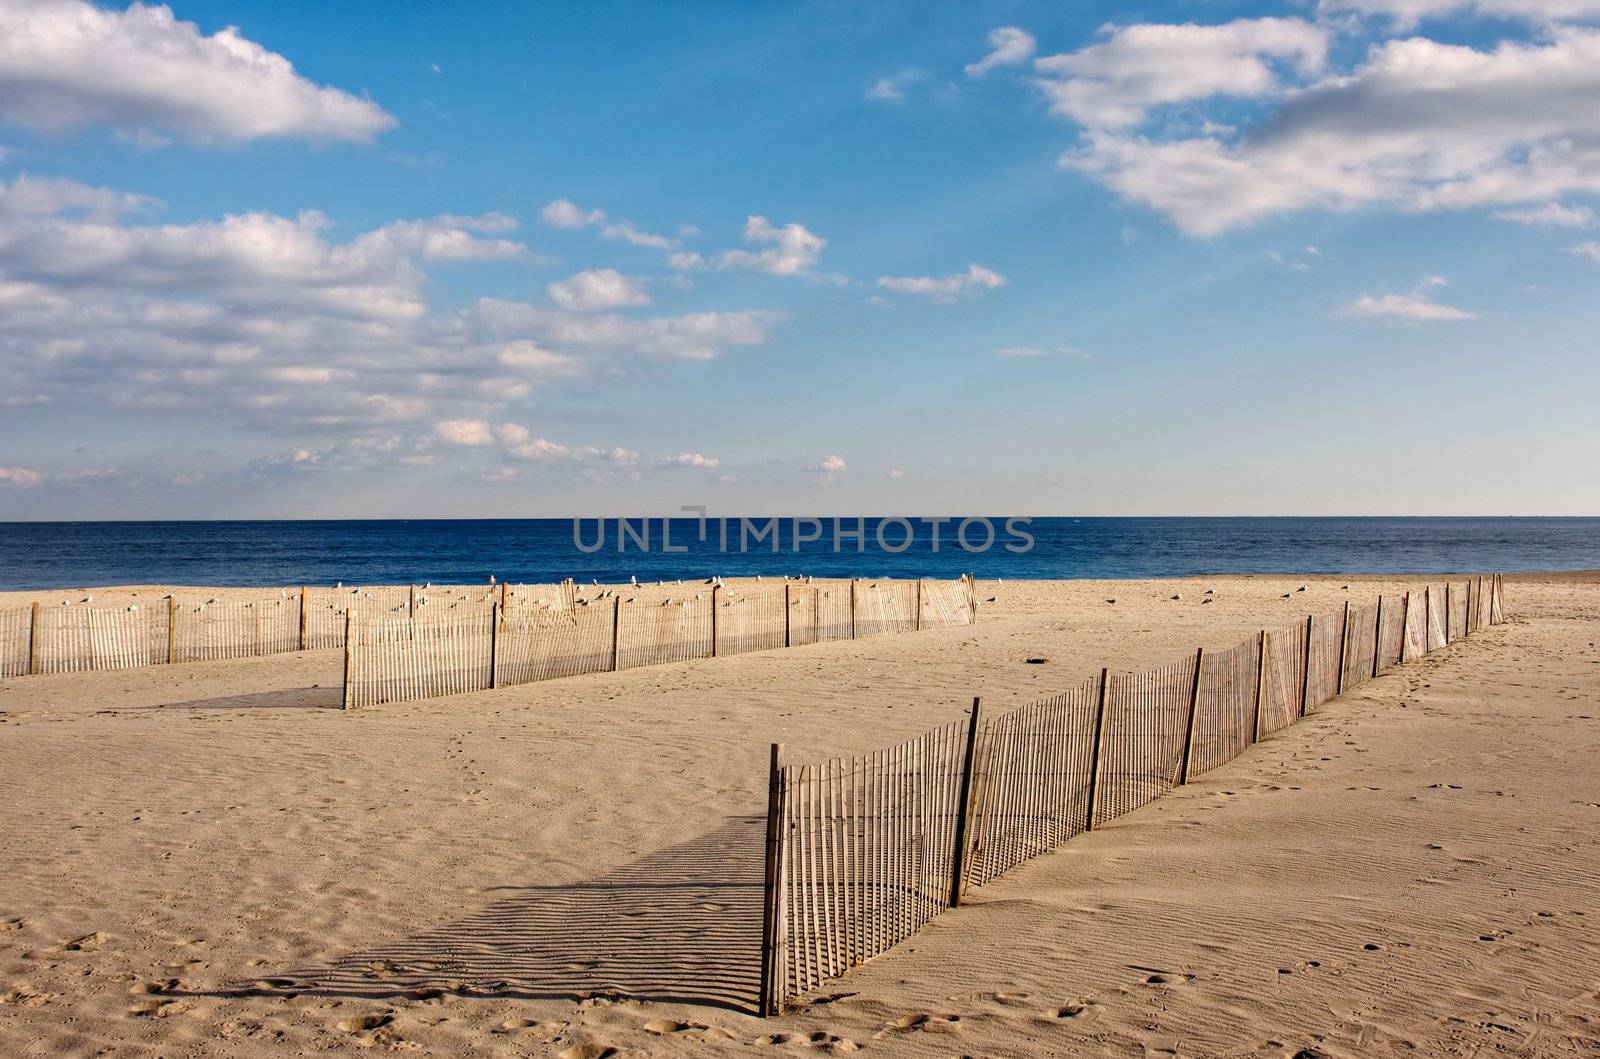 Fences on the Beach by sbonk